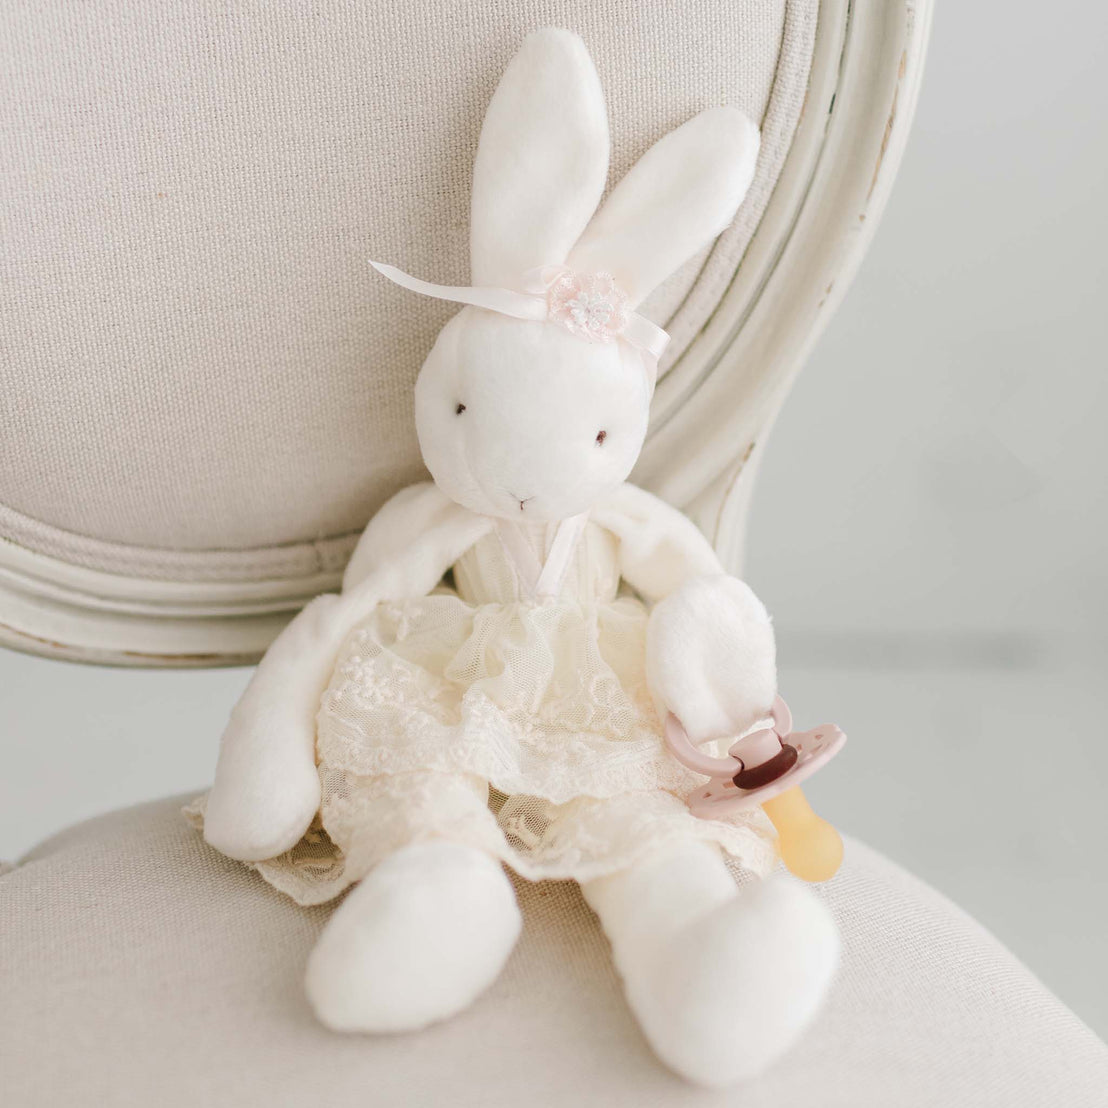 A Jessica Silly Bunny Buddy Pacifier Holder dressed in a lacy dress and holding a Pacifier, sitting elegantly on a beige chair, creating a serene and soft ambiance.